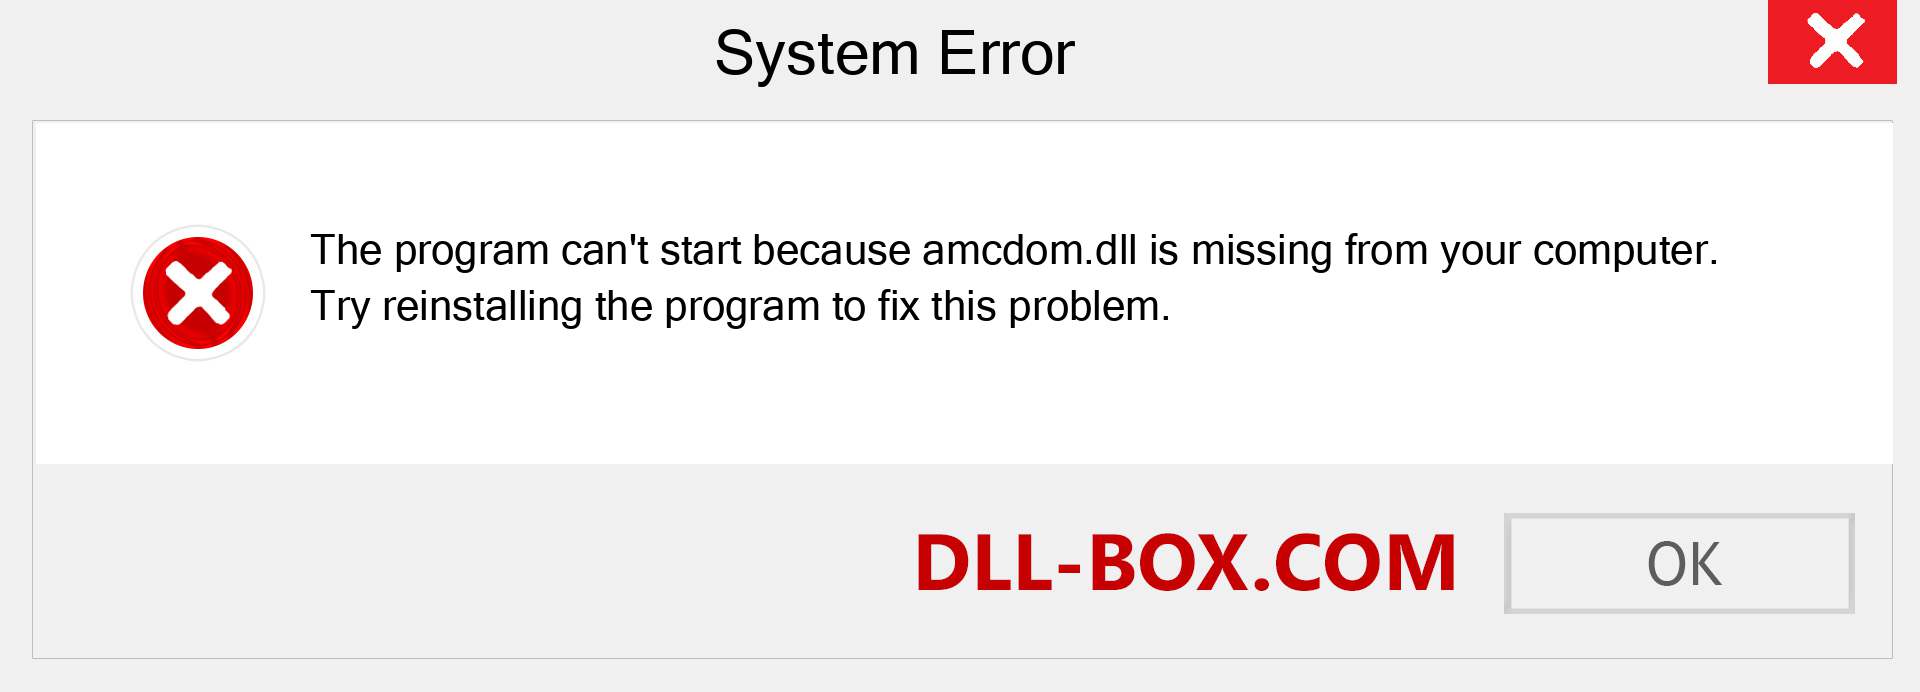  amcdom.dll file is missing?. Download for Windows 7, 8, 10 - Fix  amcdom dll Missing Error on Windows, photos, images